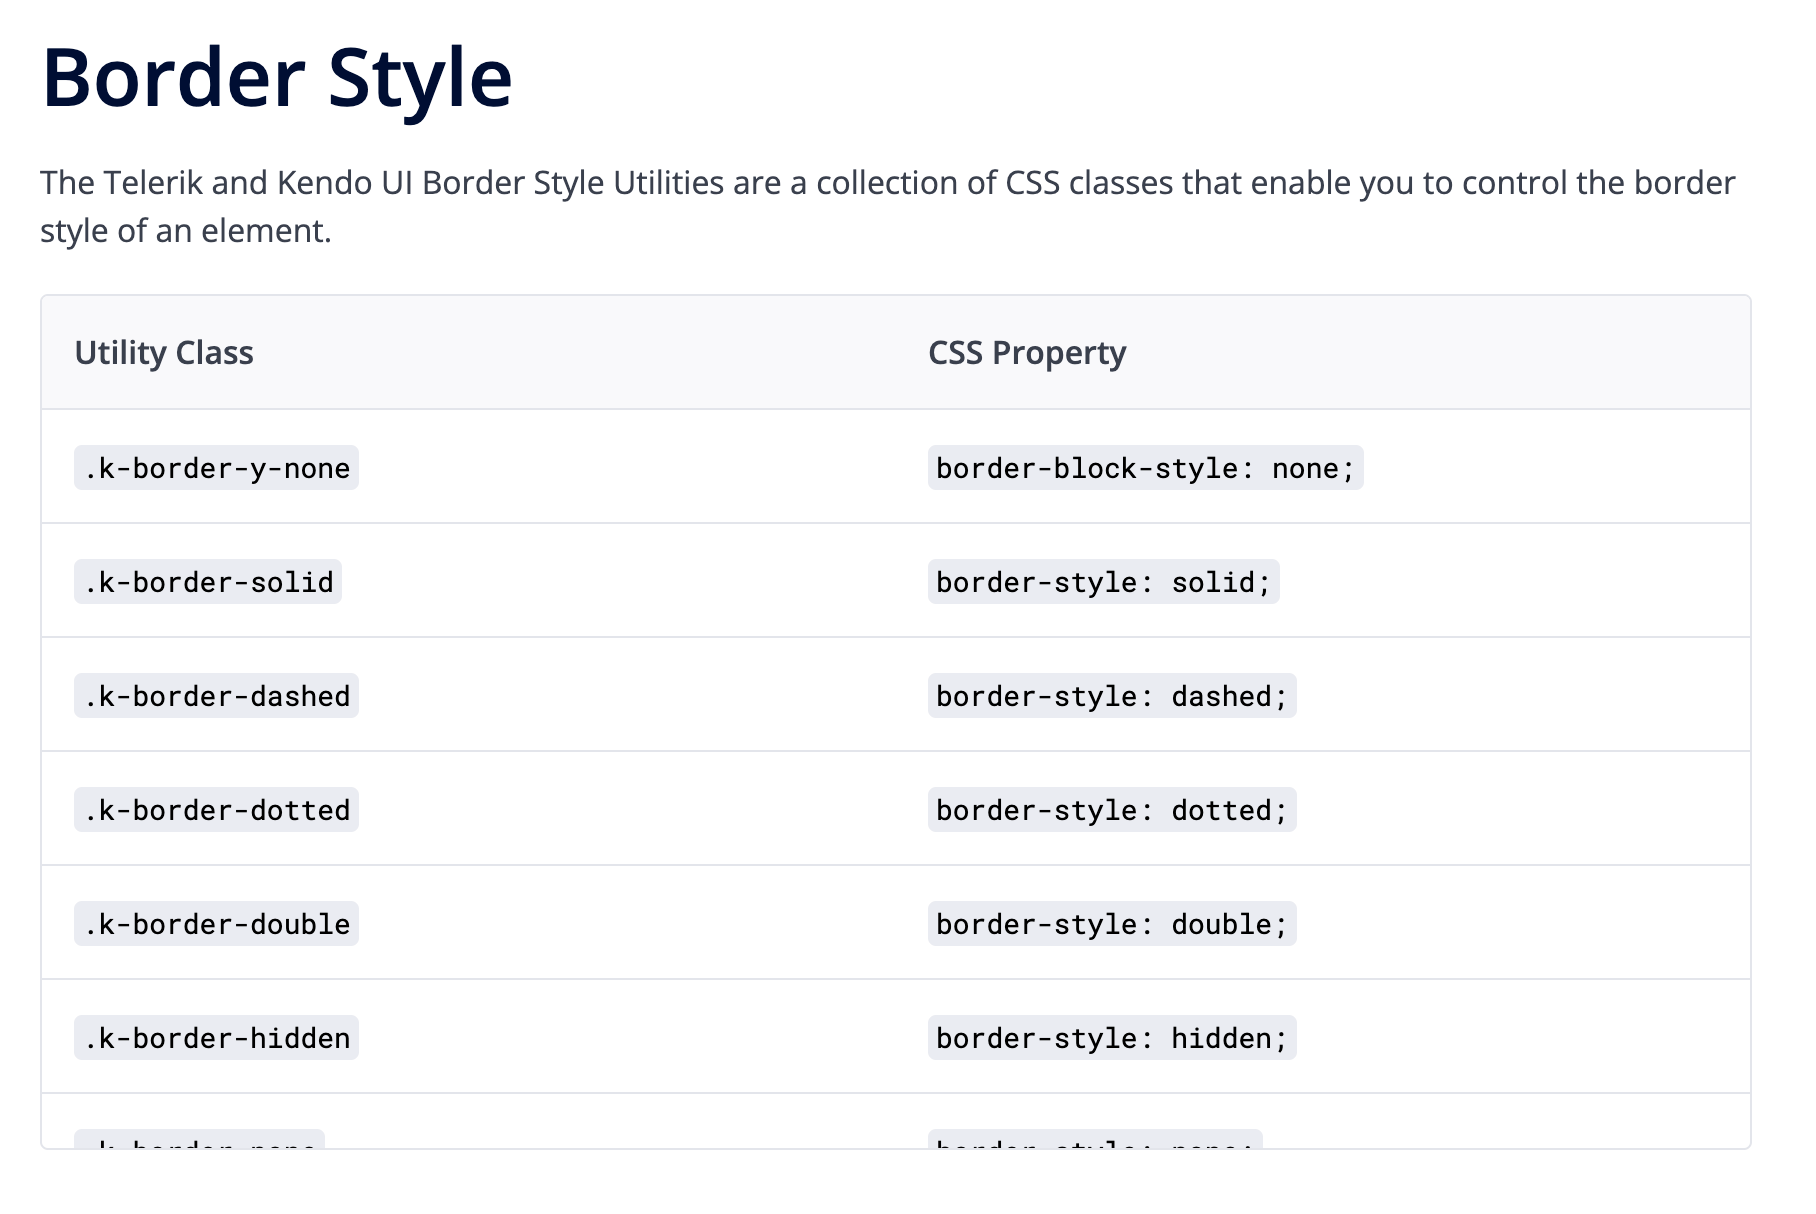 Some of the border style CSS utility classes defined by the Kendo UI CSS Utility 